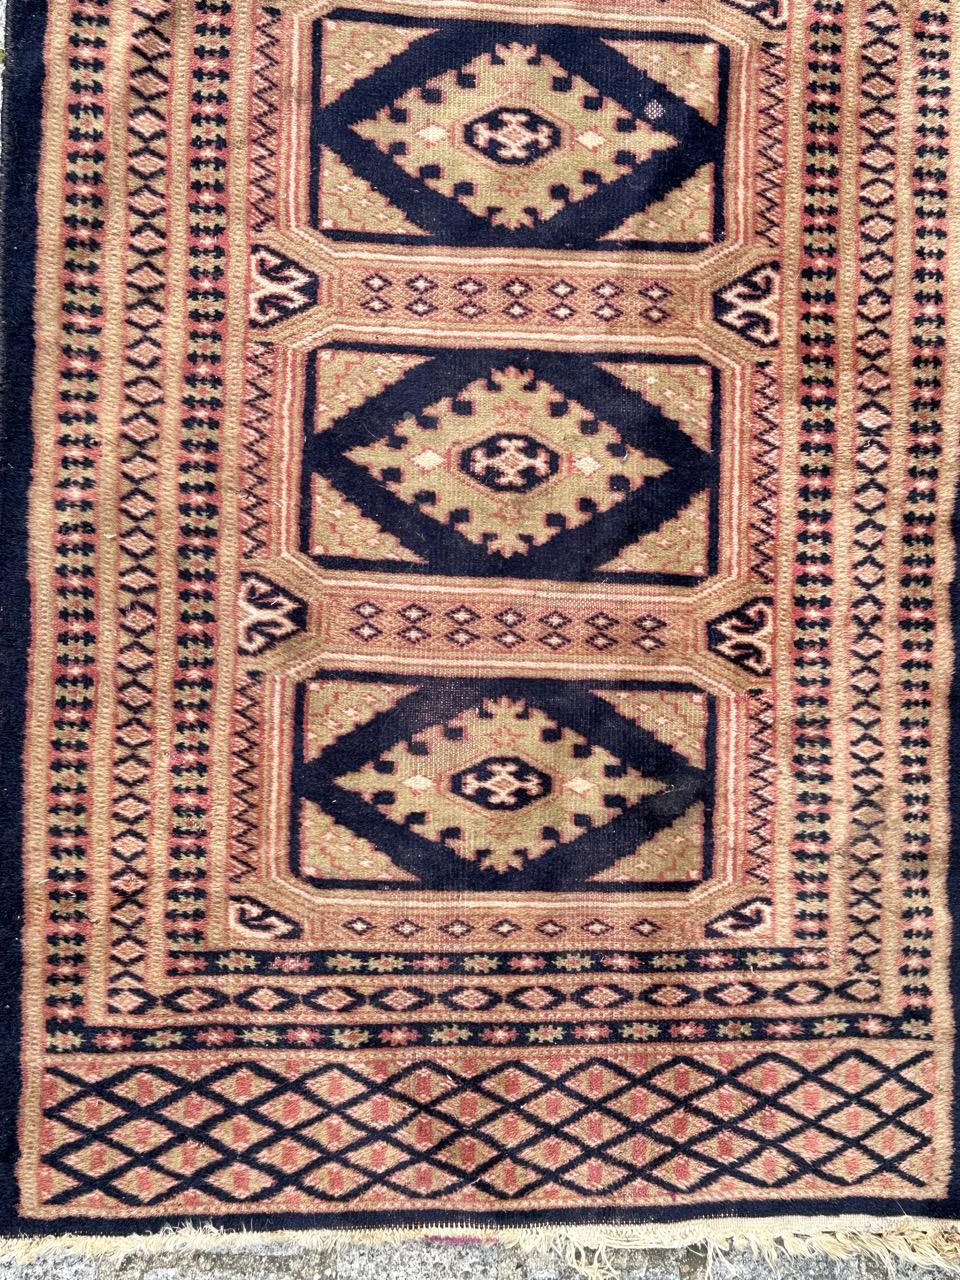 Pretty vintage Pakistani runner with a nice Turkmen design and nice colours with blue, pink and green, entirely hand knotted with wool on cotton foundation.

✨✨✨
